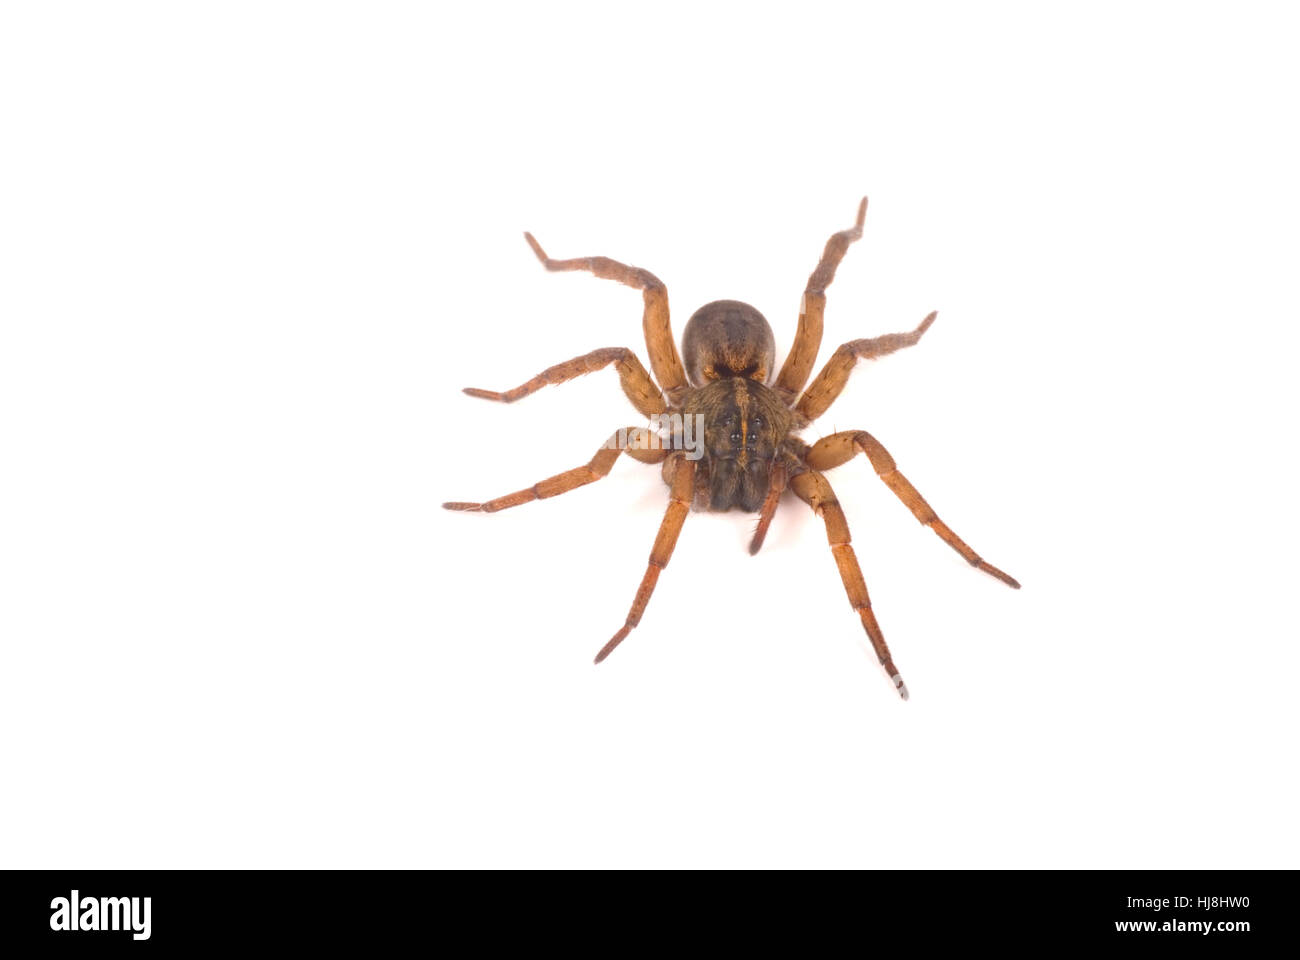 A full view of a wolf spider from above Stock Photo